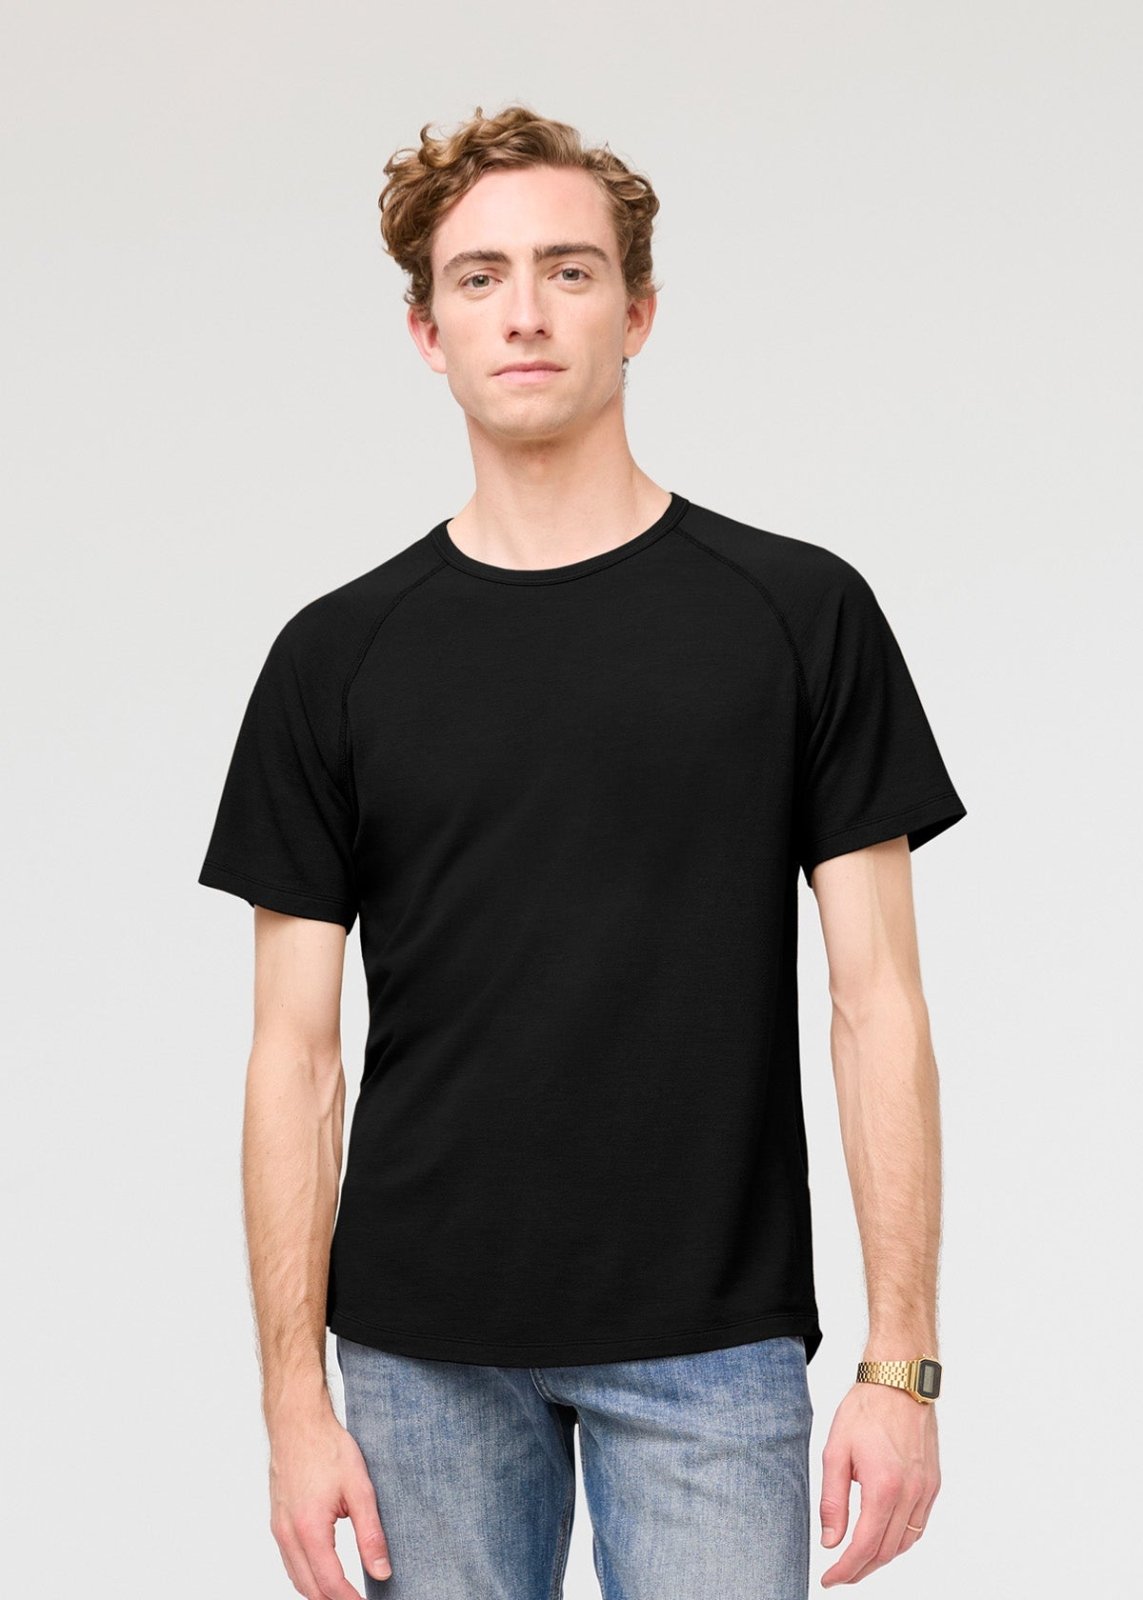 mens breathable black tee front